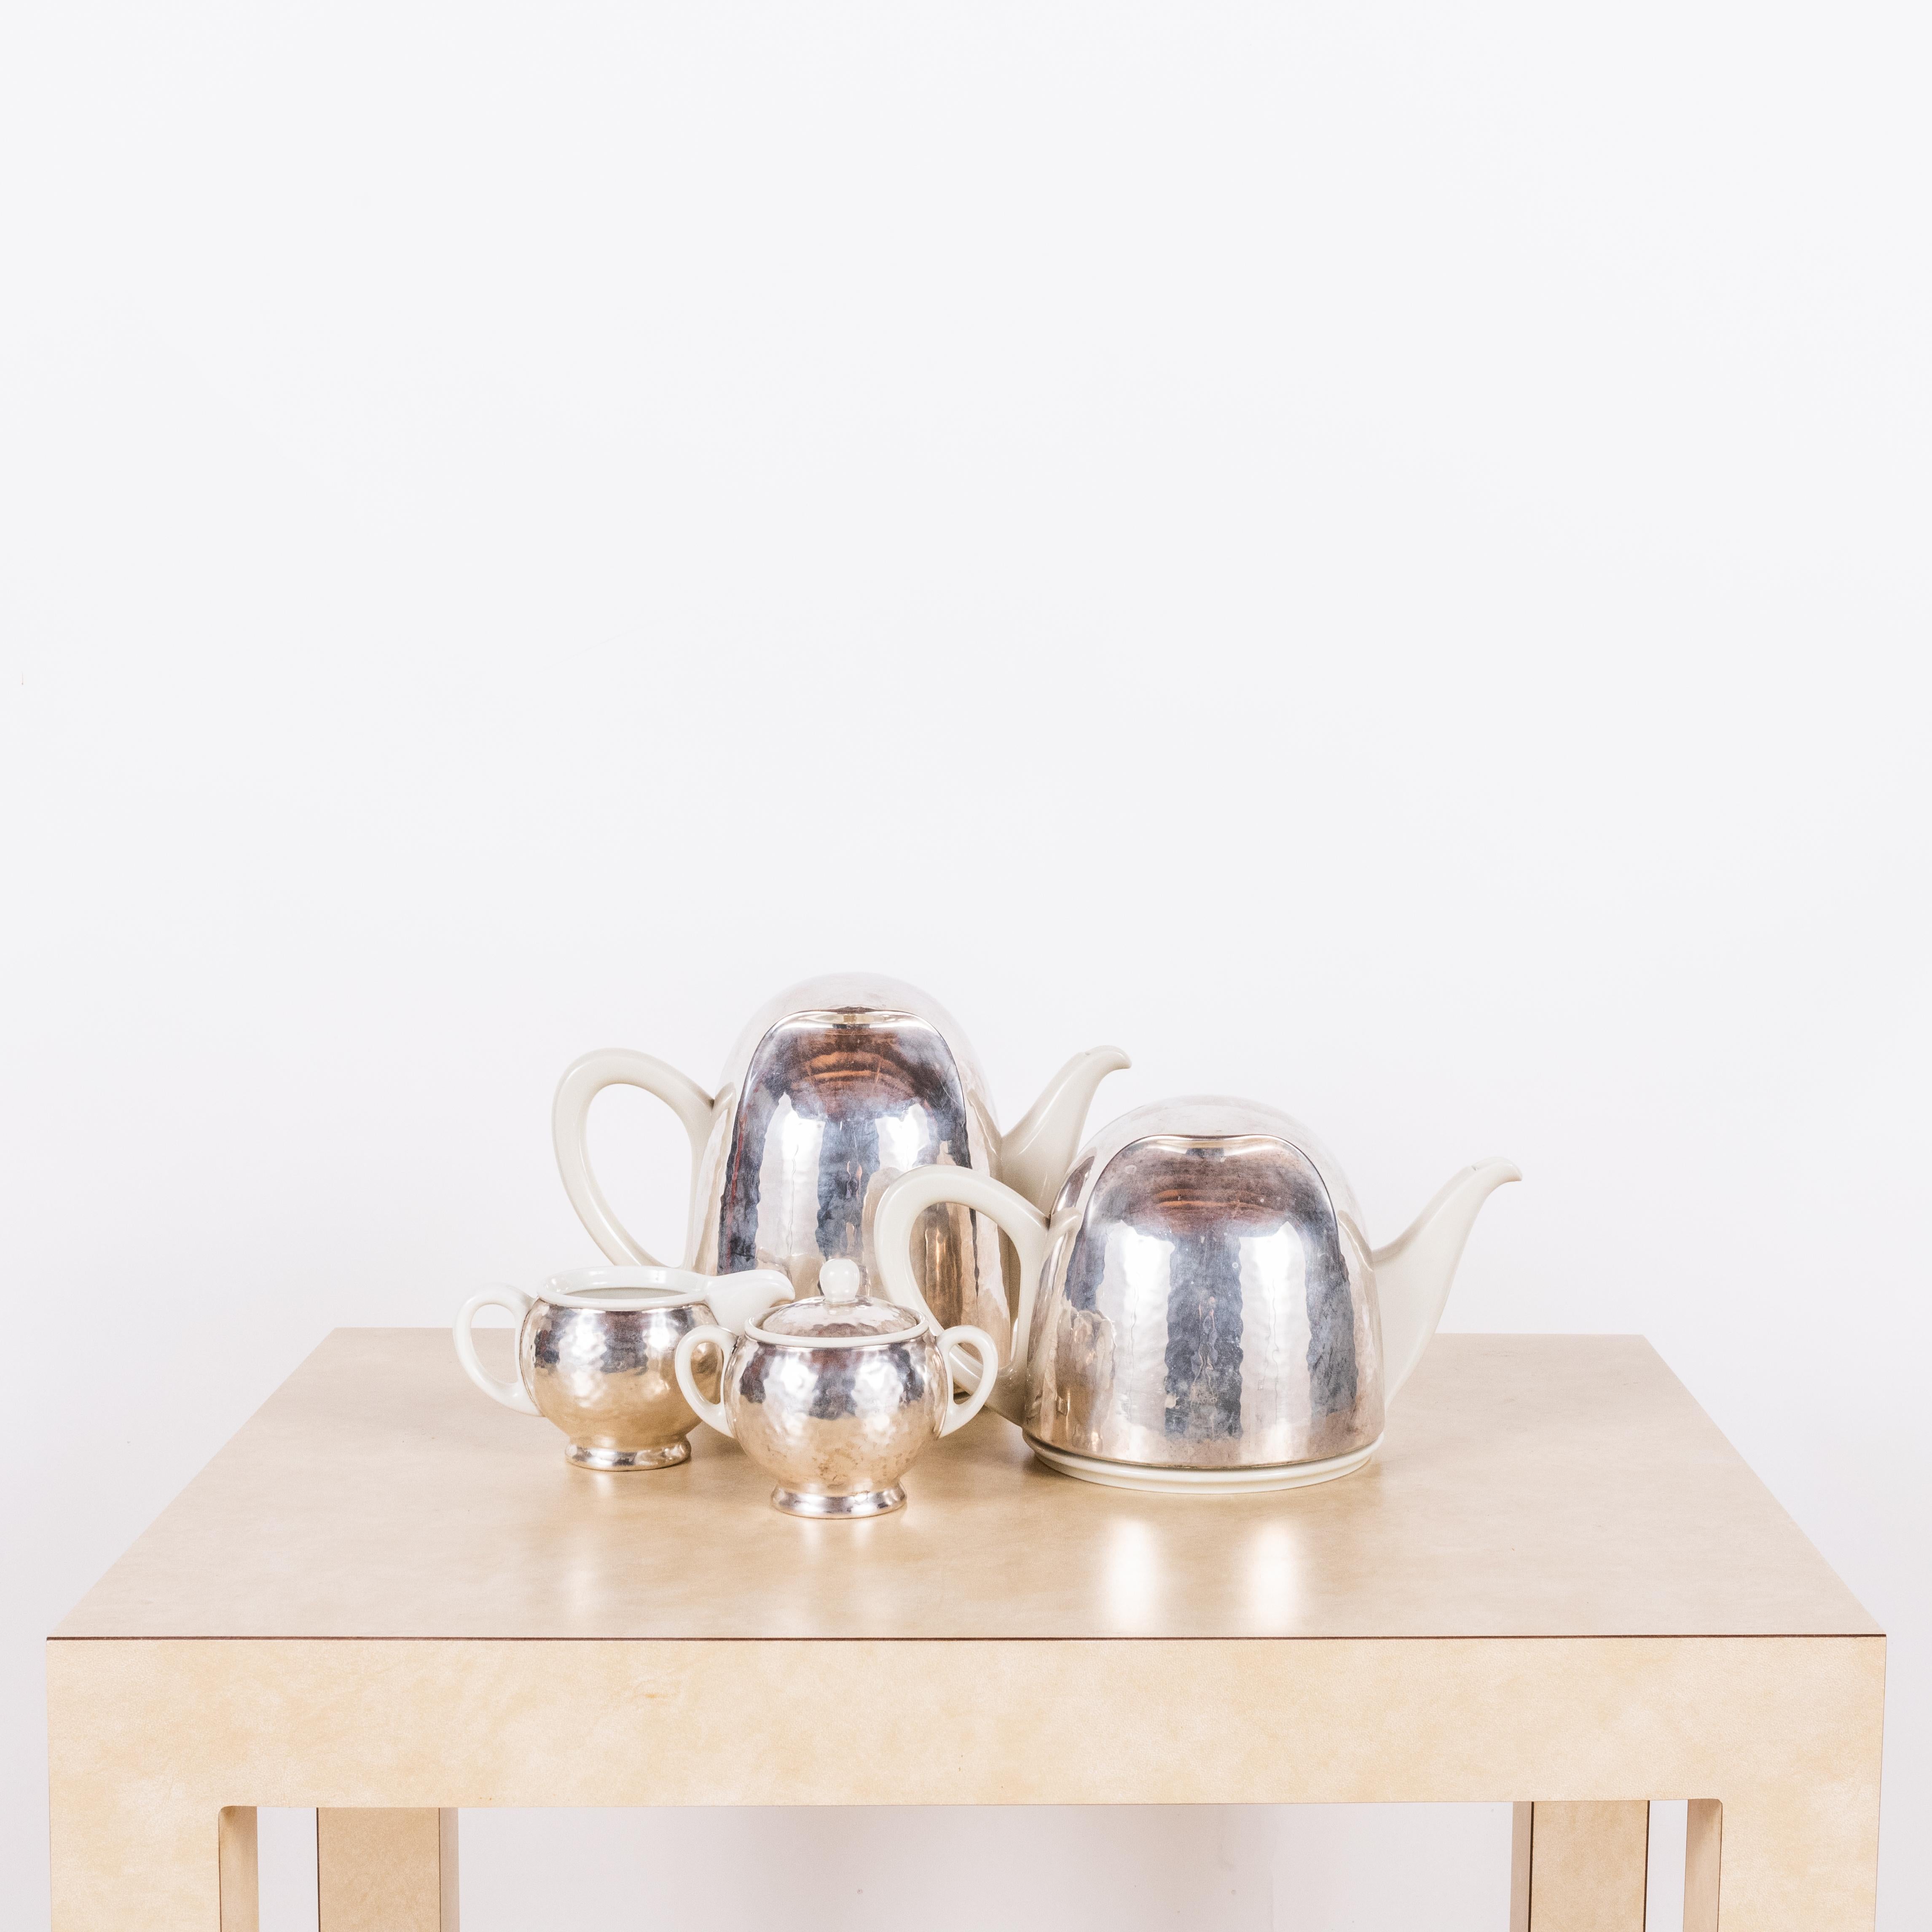 Bauhaus Hutschenreuther Selb (Bavaria) Silver-clad tea and coffee set.

Incredible design: silver plated thermal insulators lined with felt covering the pots.

Sold as a set.

Dimensions listed are for the largest piece.